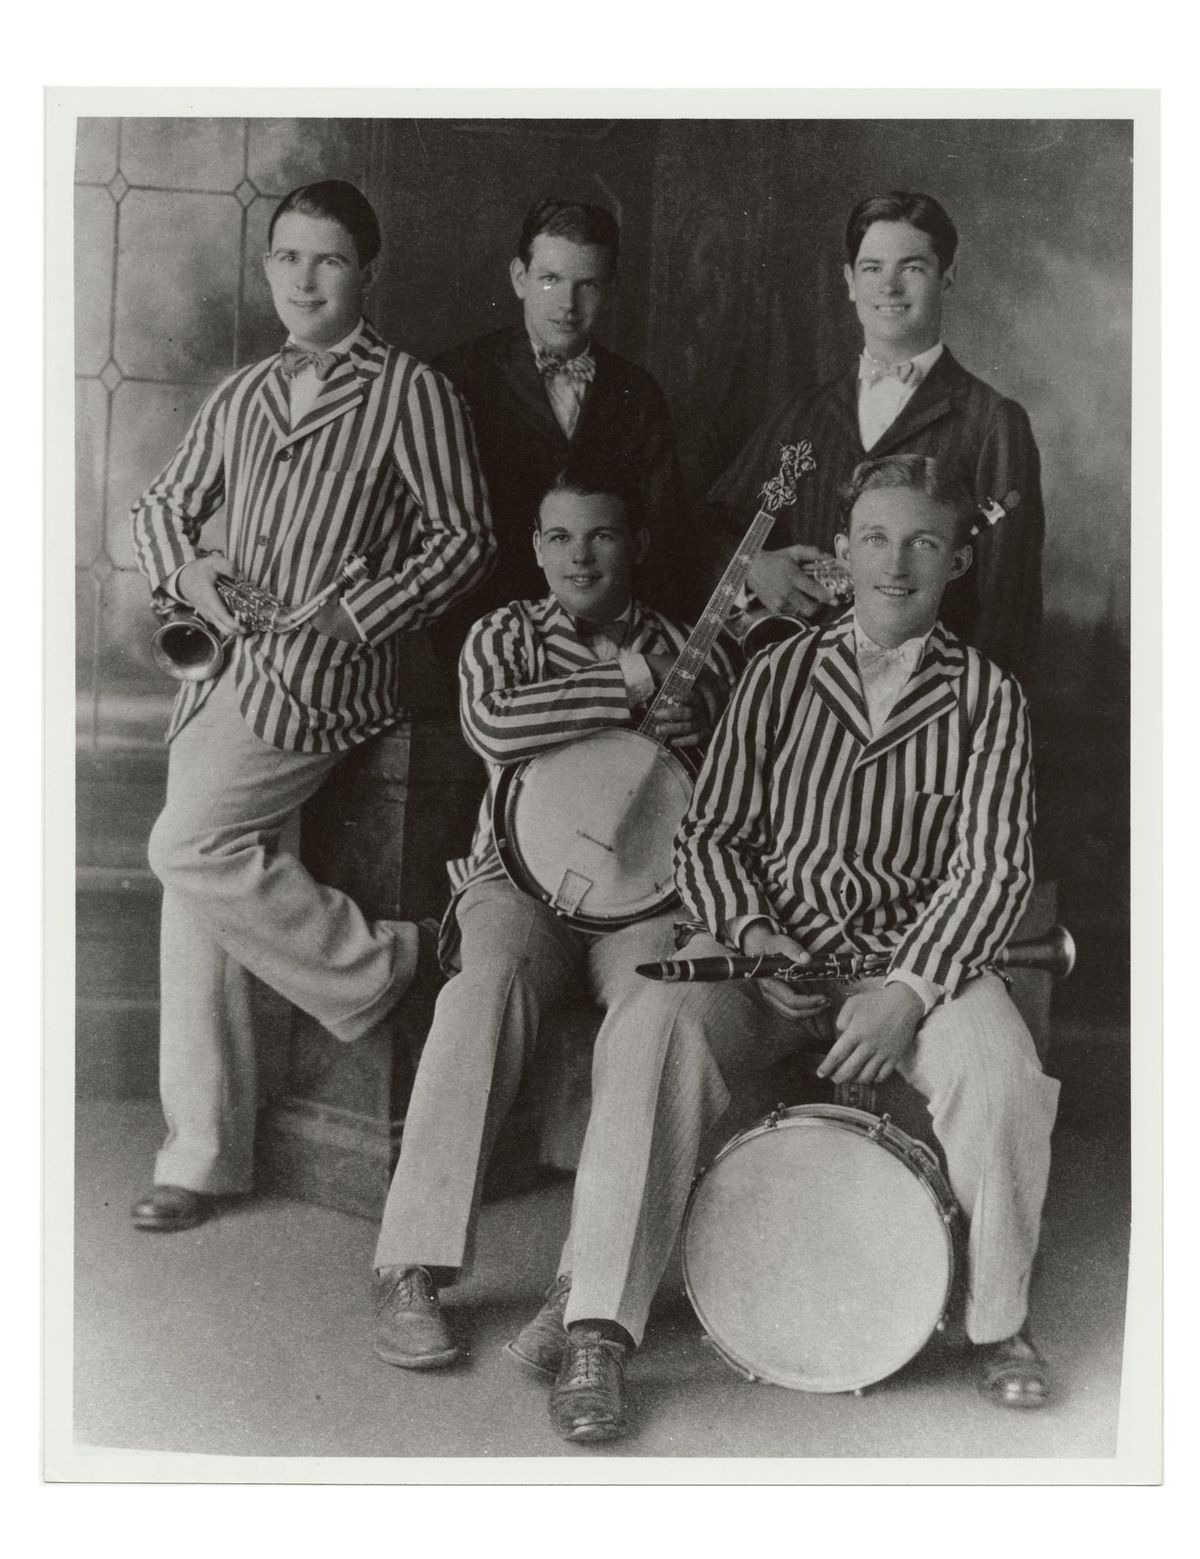 Before they joined Paul Whiteman, Spokane boys Bing Crosby and Al Rinker performed with the Musicaladers, Rinker